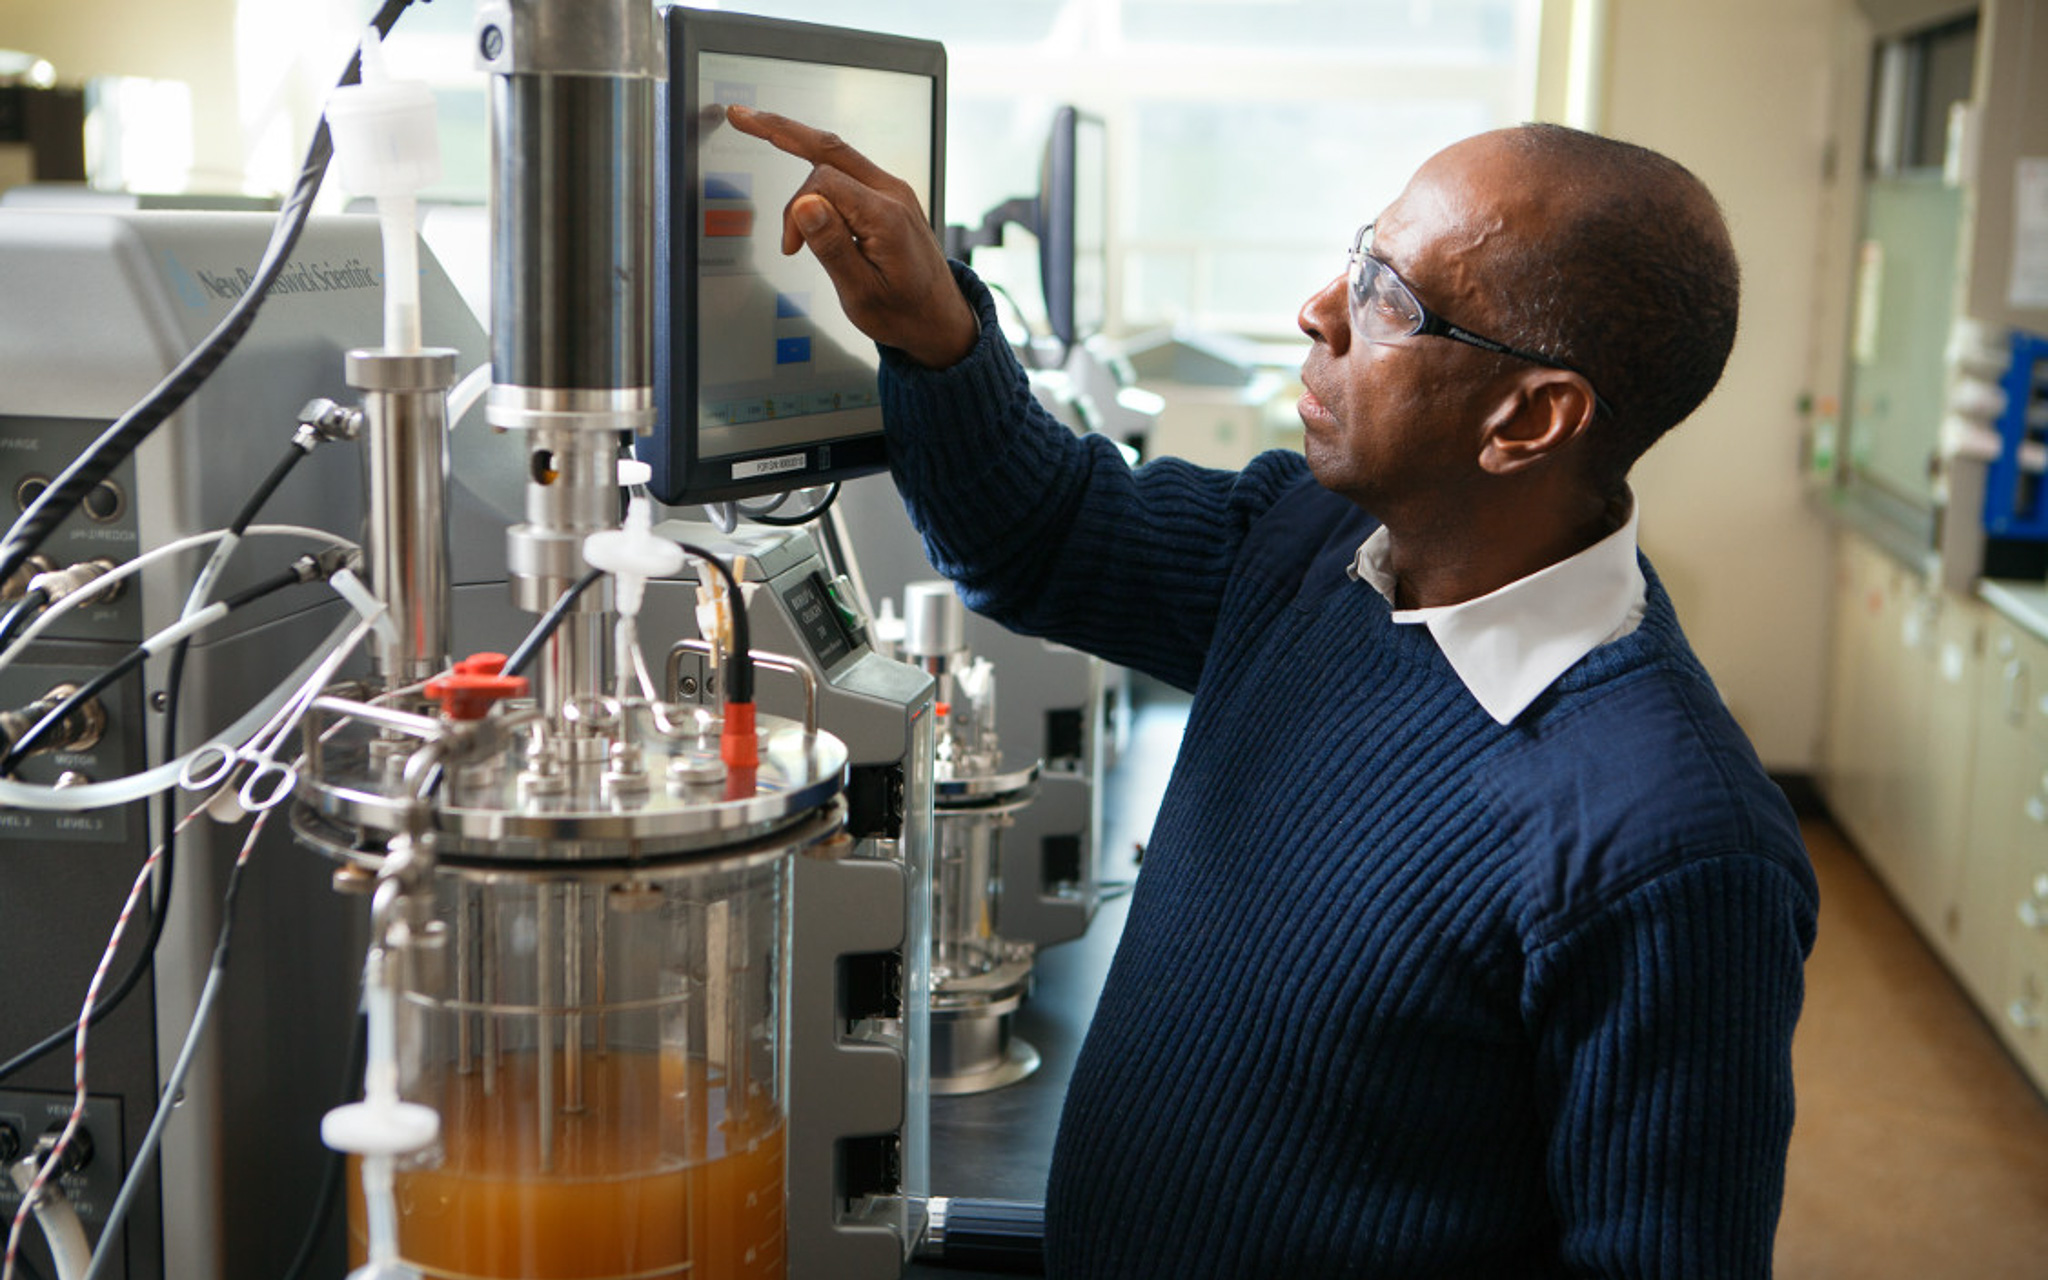 Researcher demonstrating technology and equipment in the Biofuels Research Lab